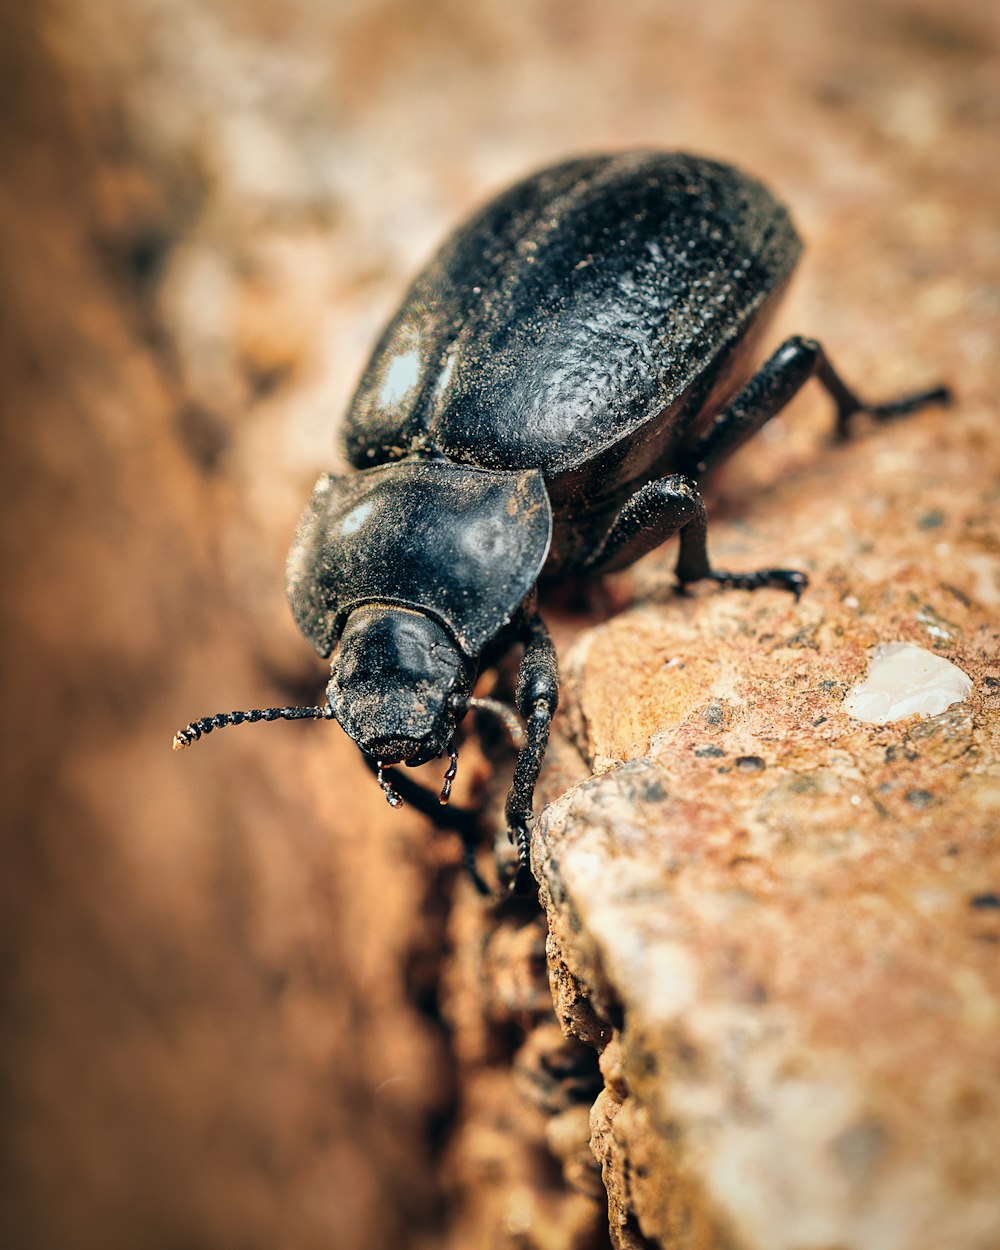 a close up of a beetle on a rock